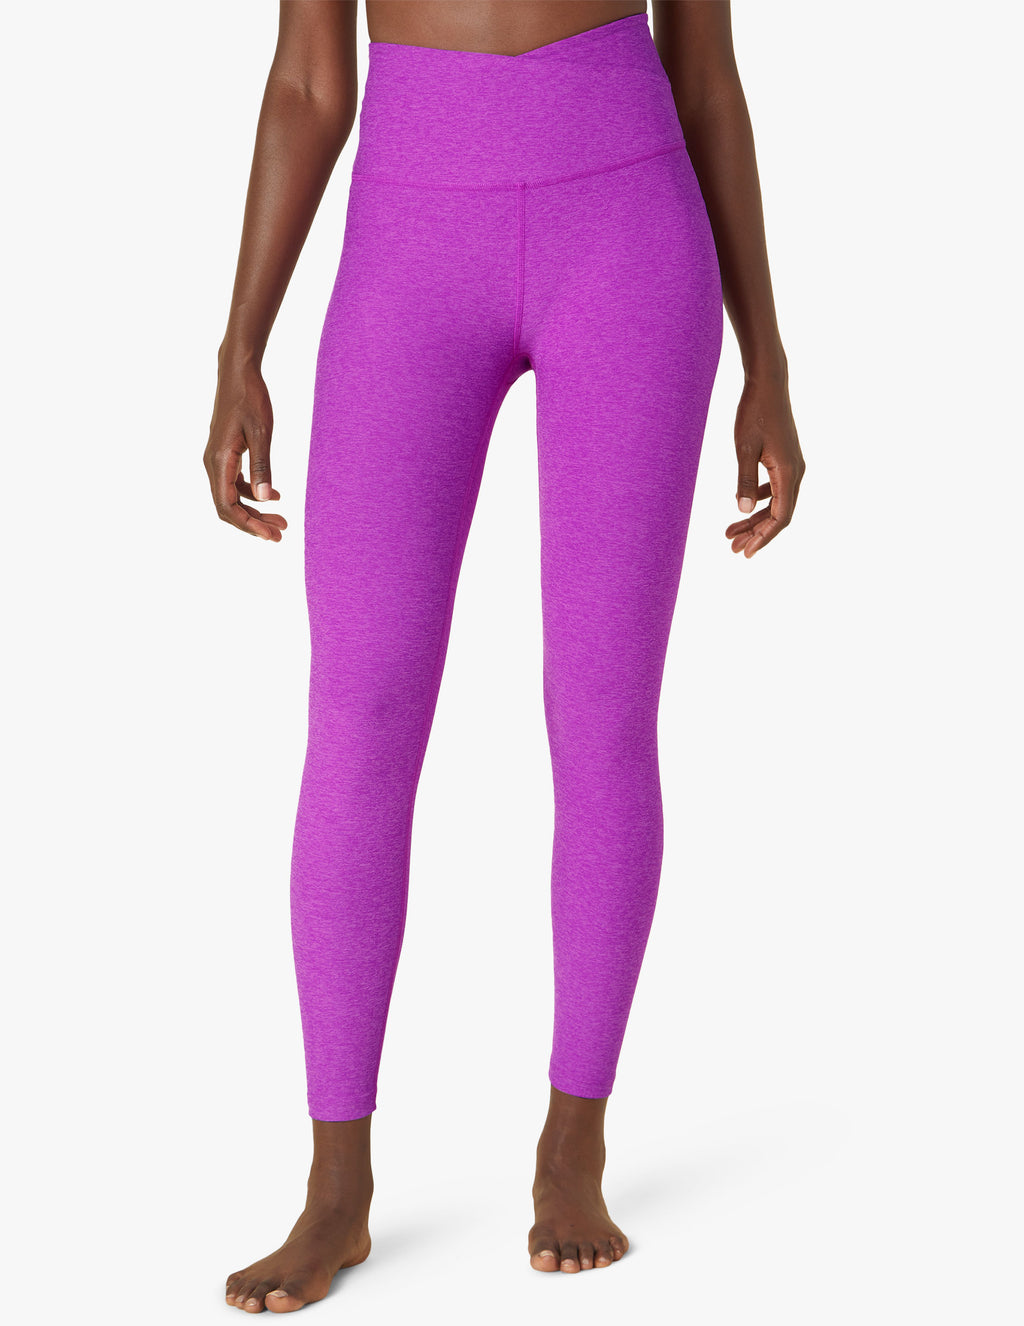 Spacedye At Your Leisure High Waisted Midi Legging Featured Image